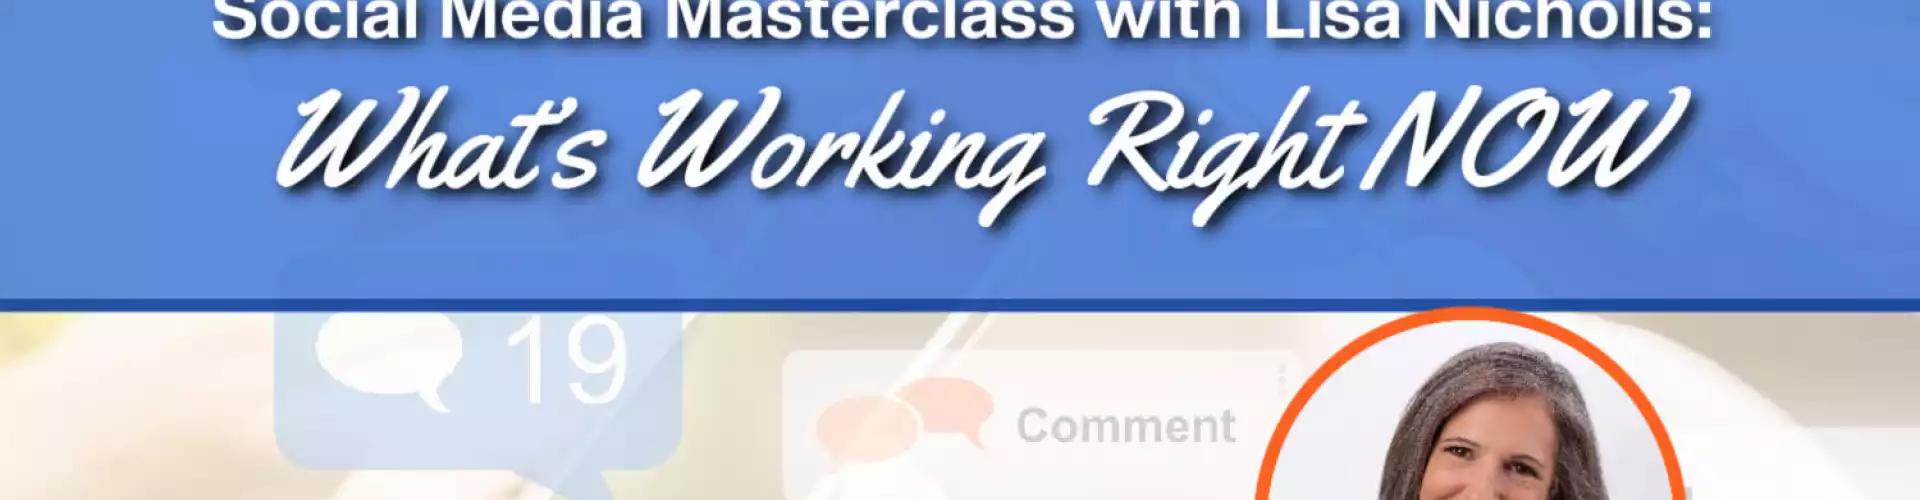 Social Media Masterclass with Lisa Nicholls:  What’s Working Right NOW